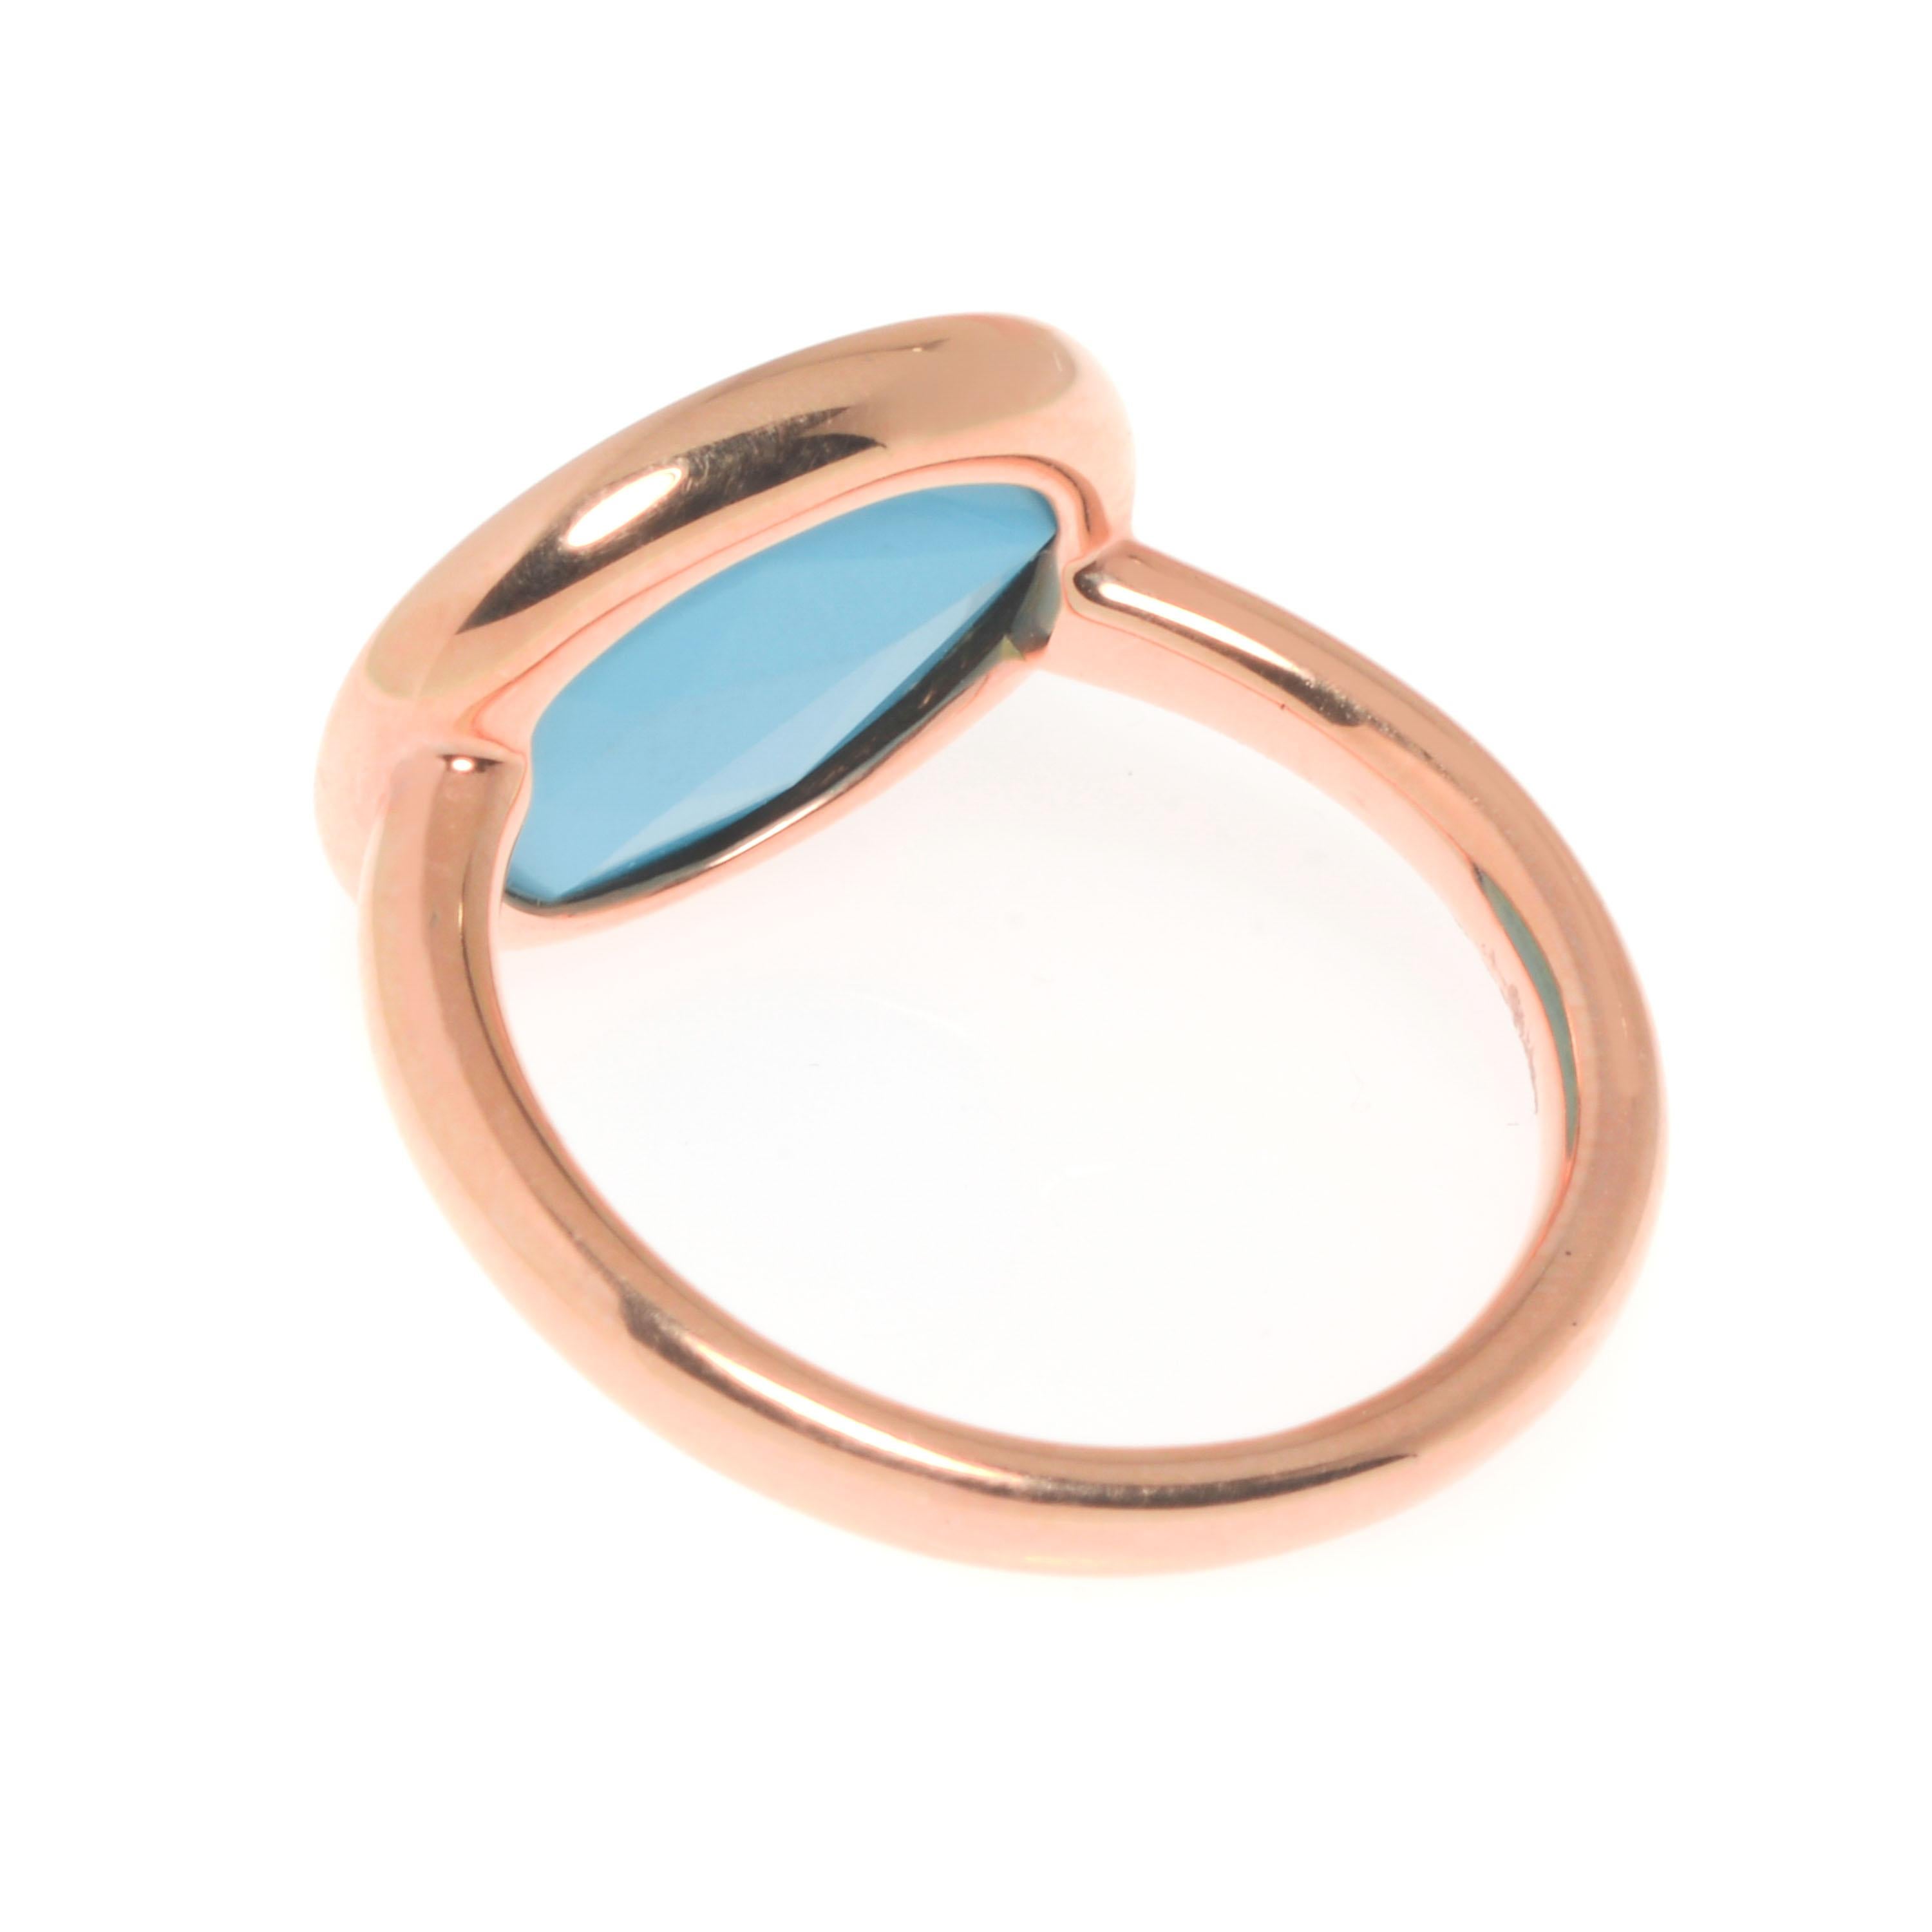 Contemporary Mimi Milano 18K Rose Gold, Turquoise Cocktail Ring sz 6.75 For Sale